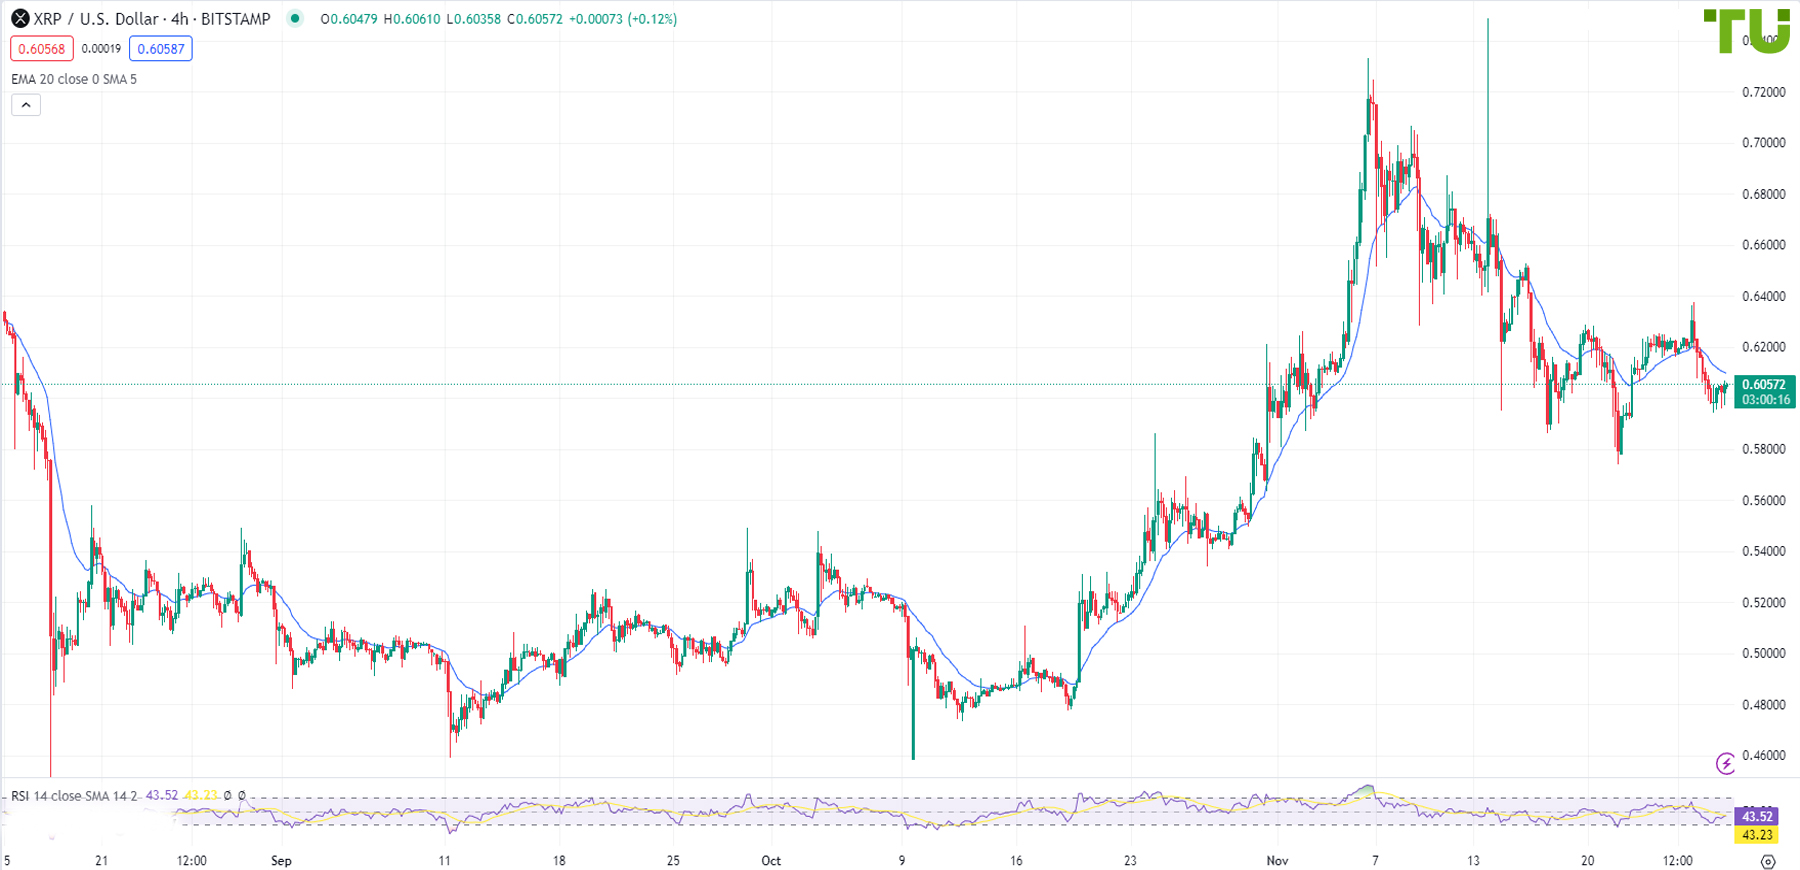 XRP/USD returned to the area of 0.60000 level